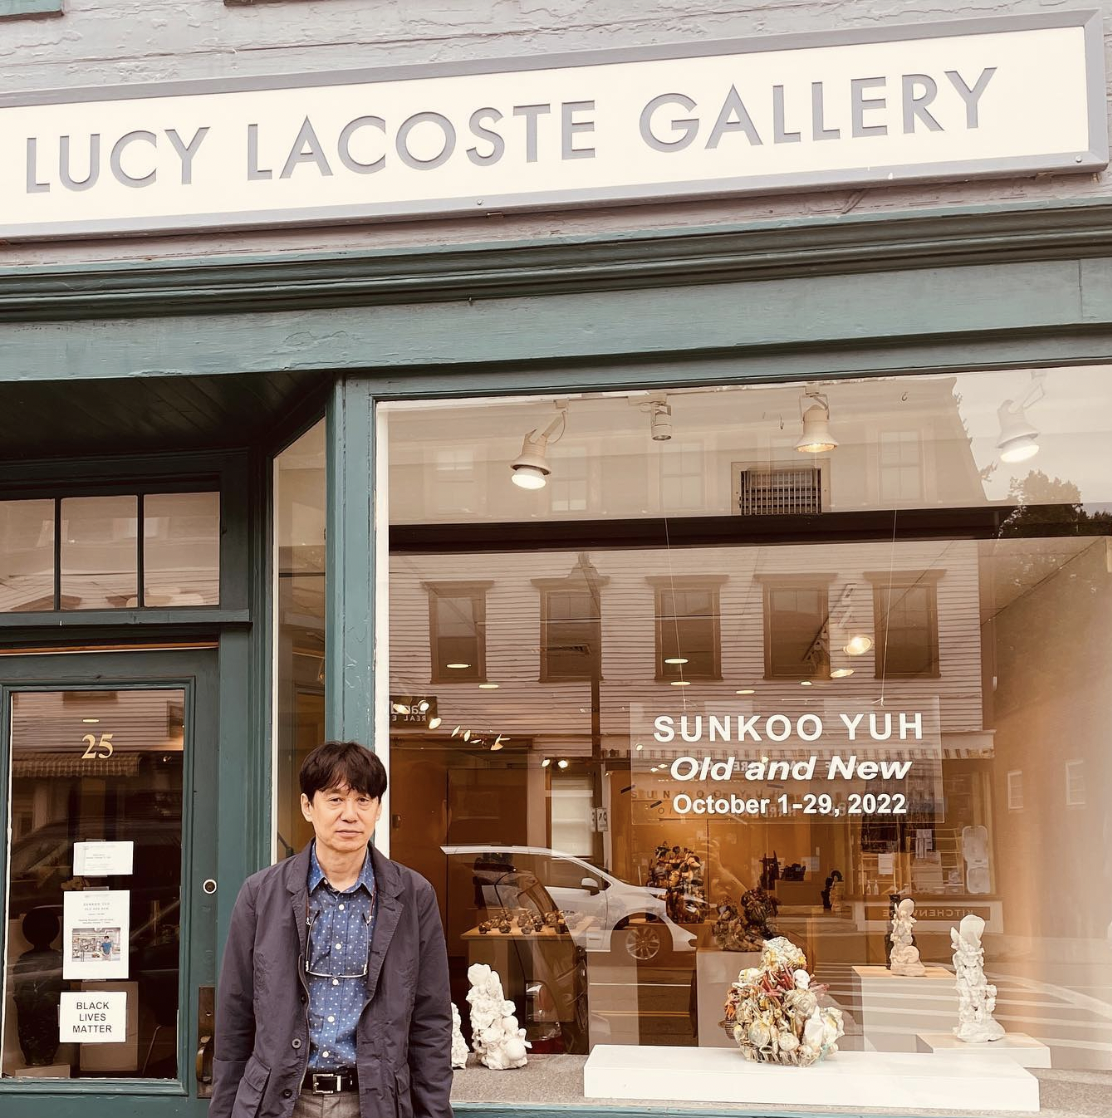 Sunkoo Yuh Outside Lucy Lacoste Gallery